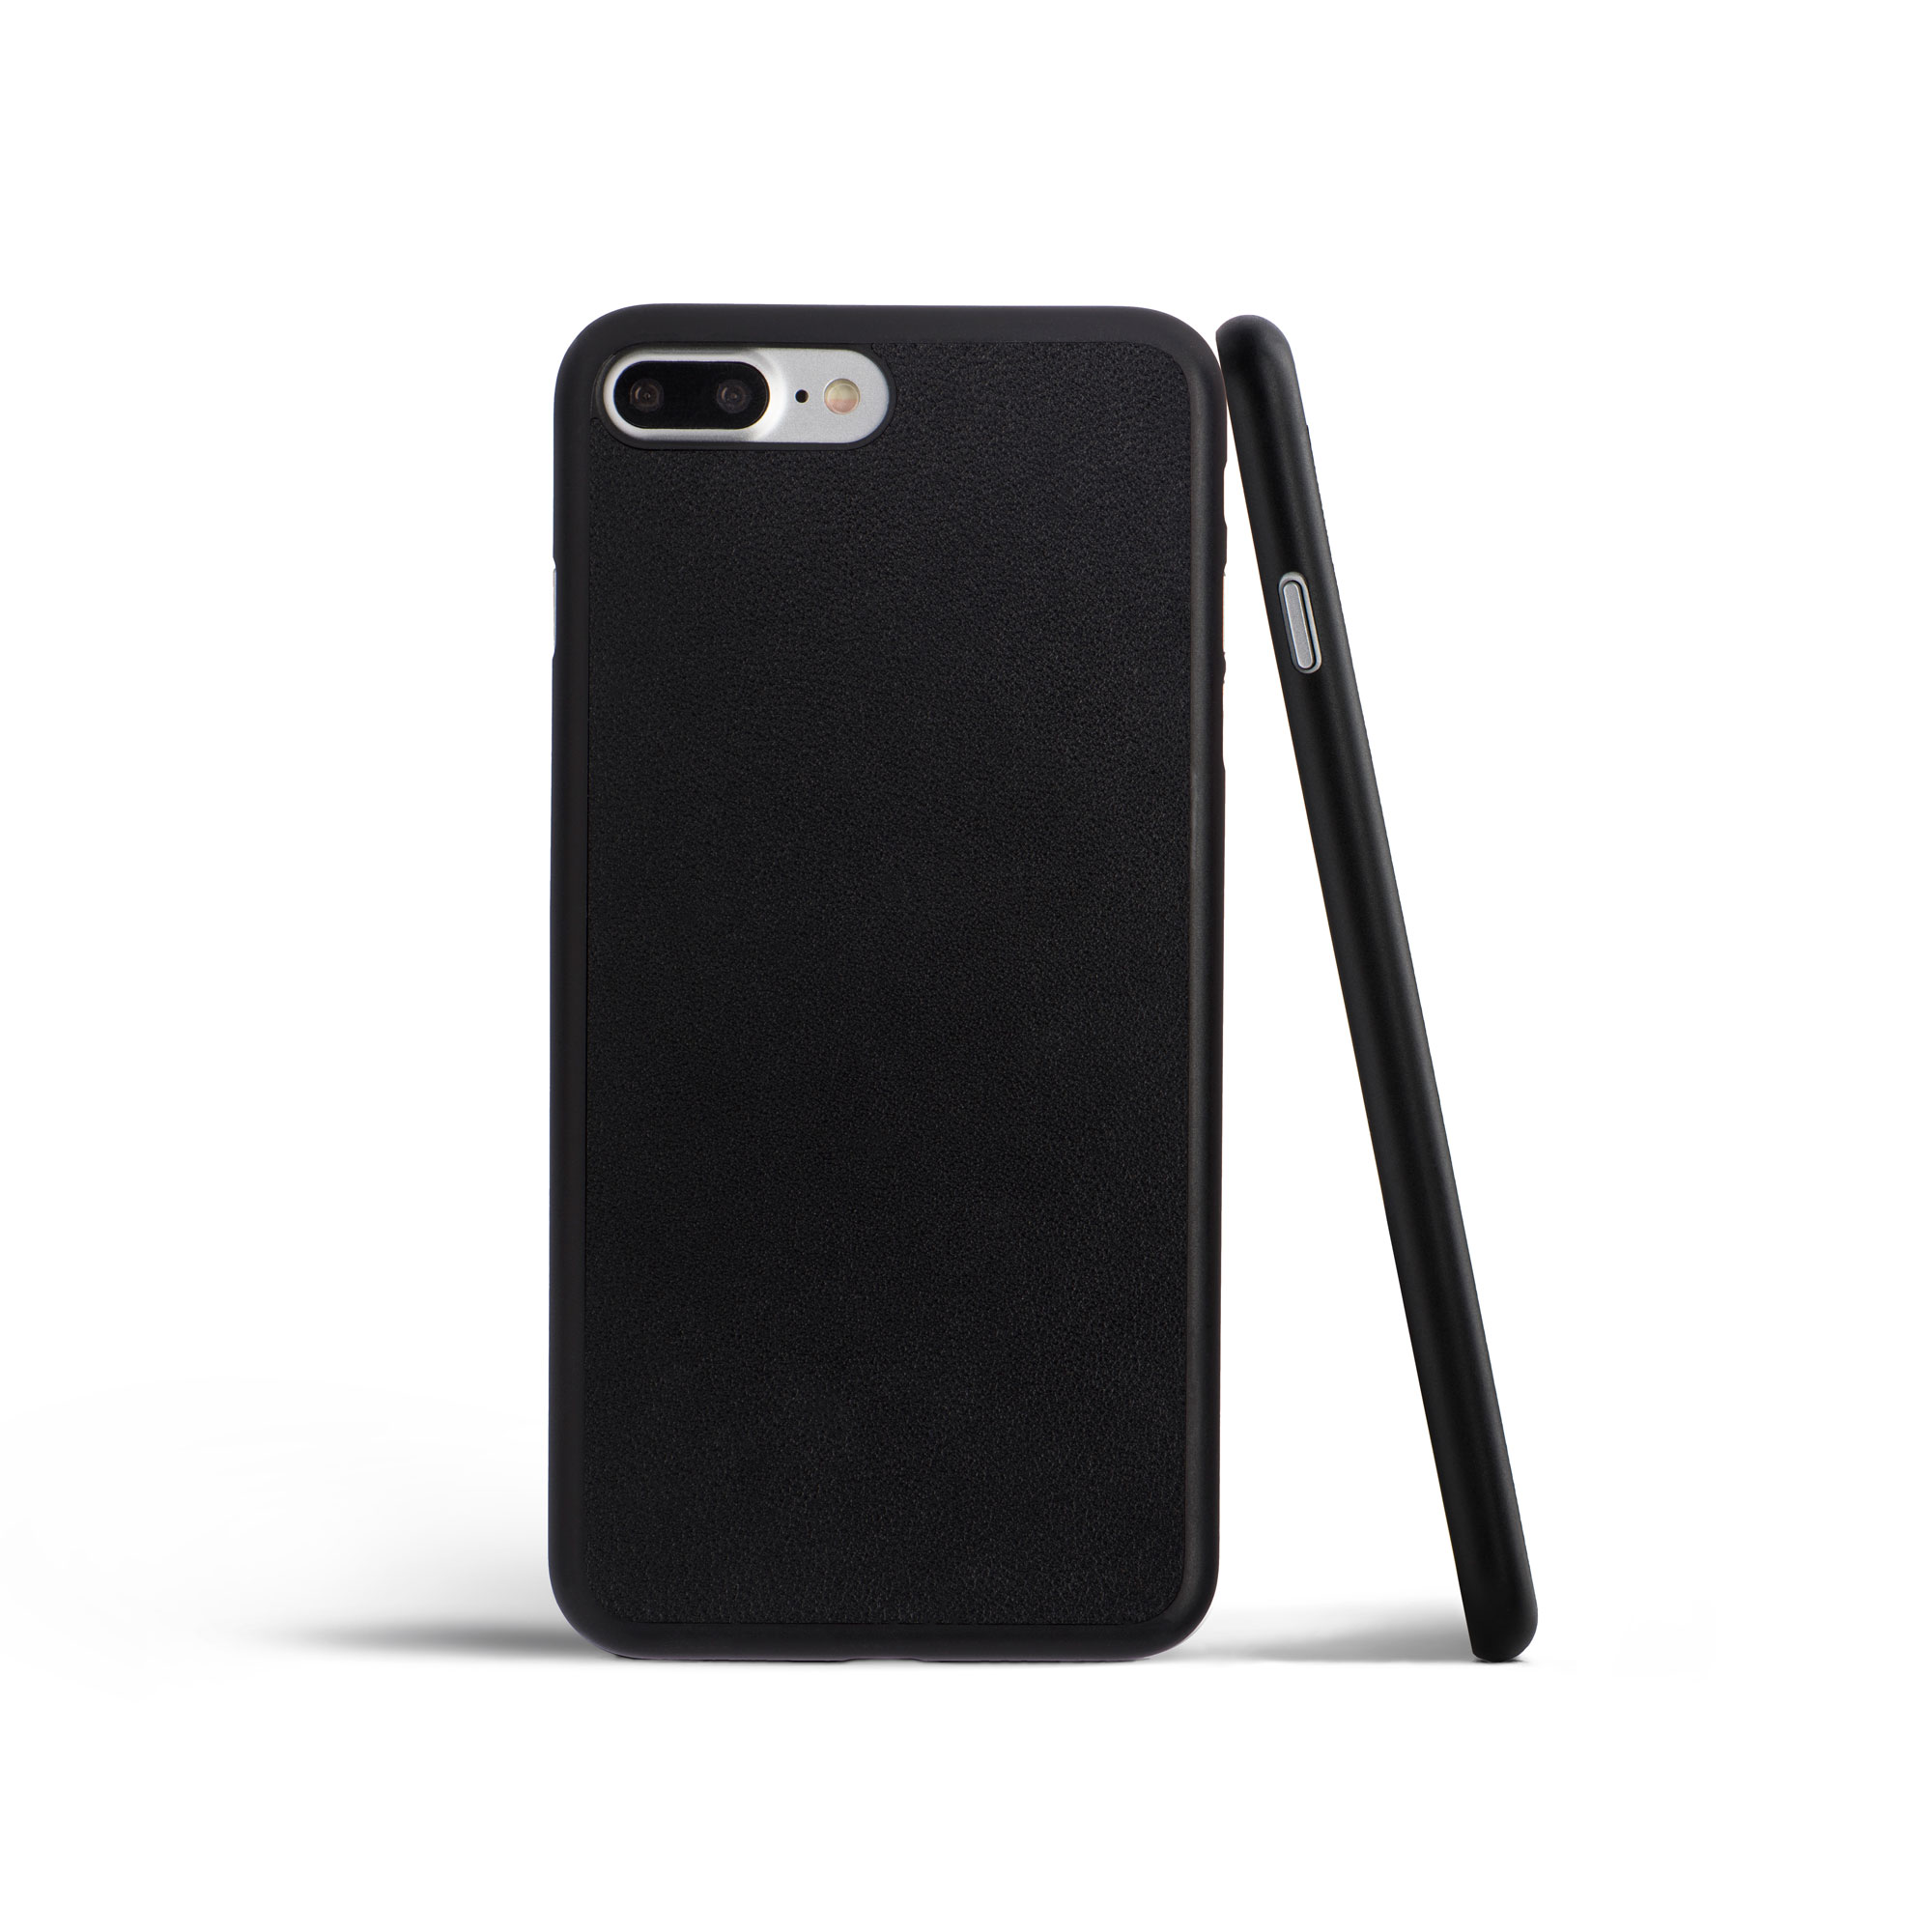 Genuine Leather Case For iPhone That is Ultra Thin